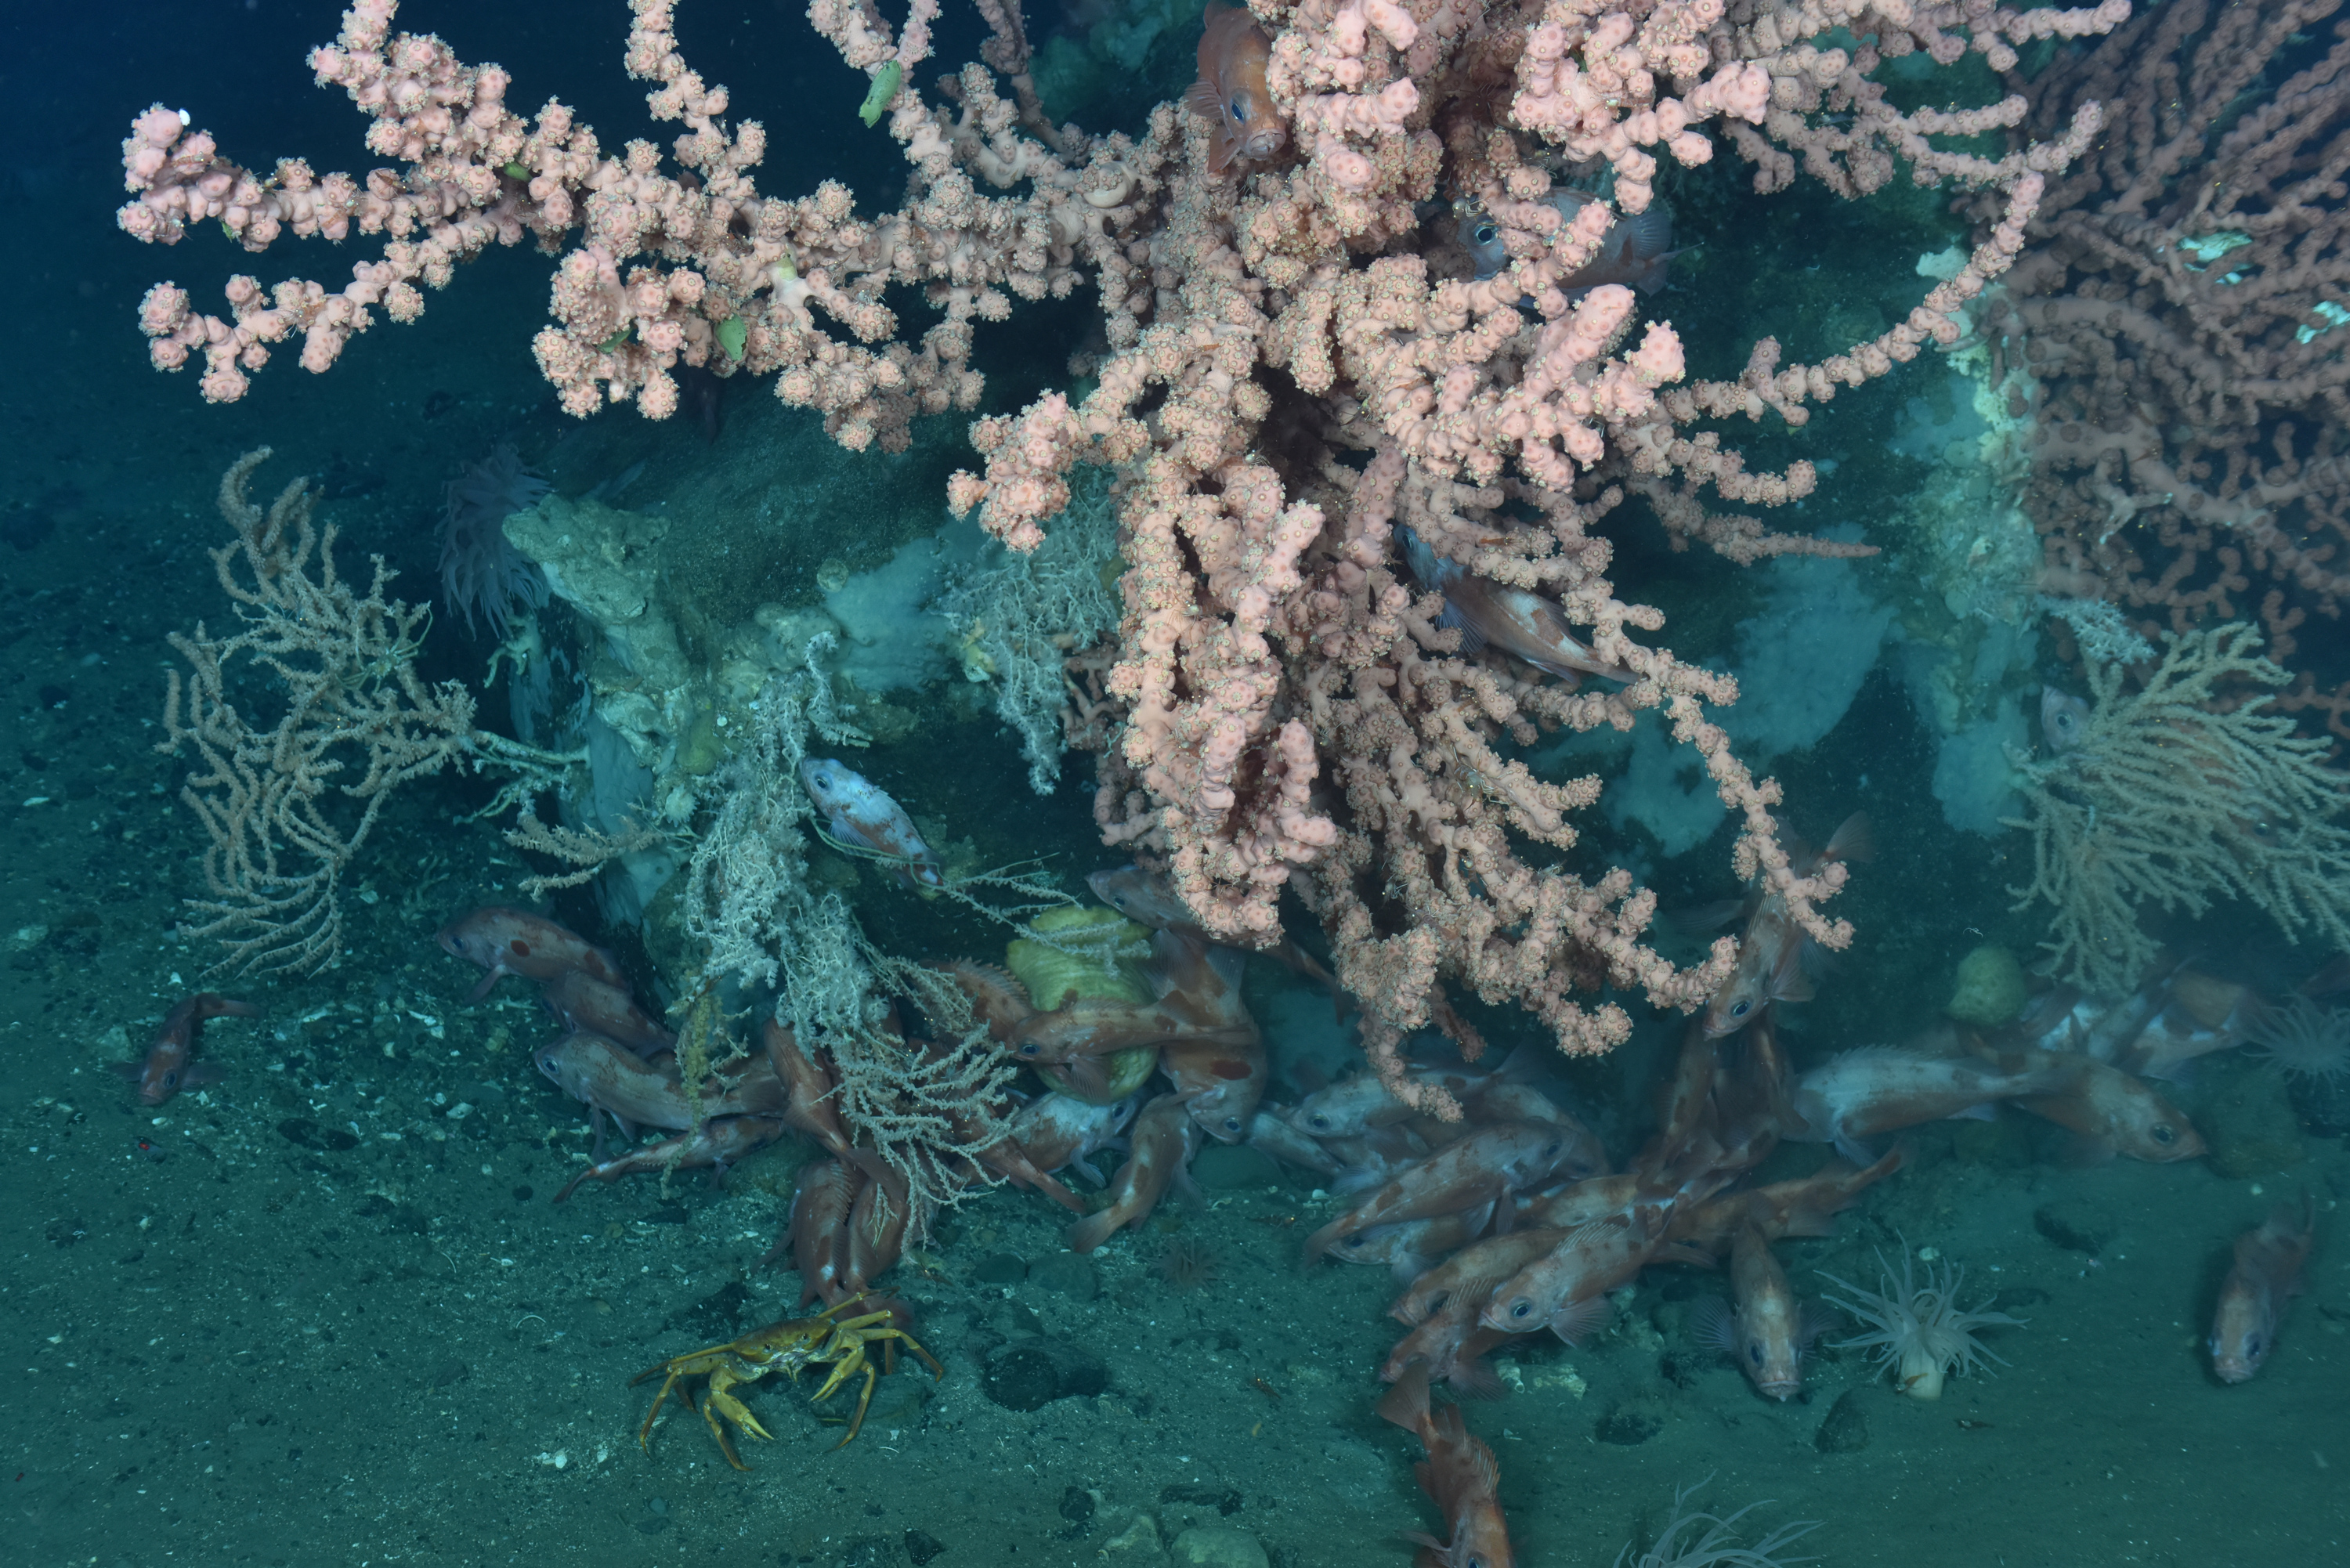 A variety of sea life including small fish and a crab cluster around cold-water coral on the ocean floor.